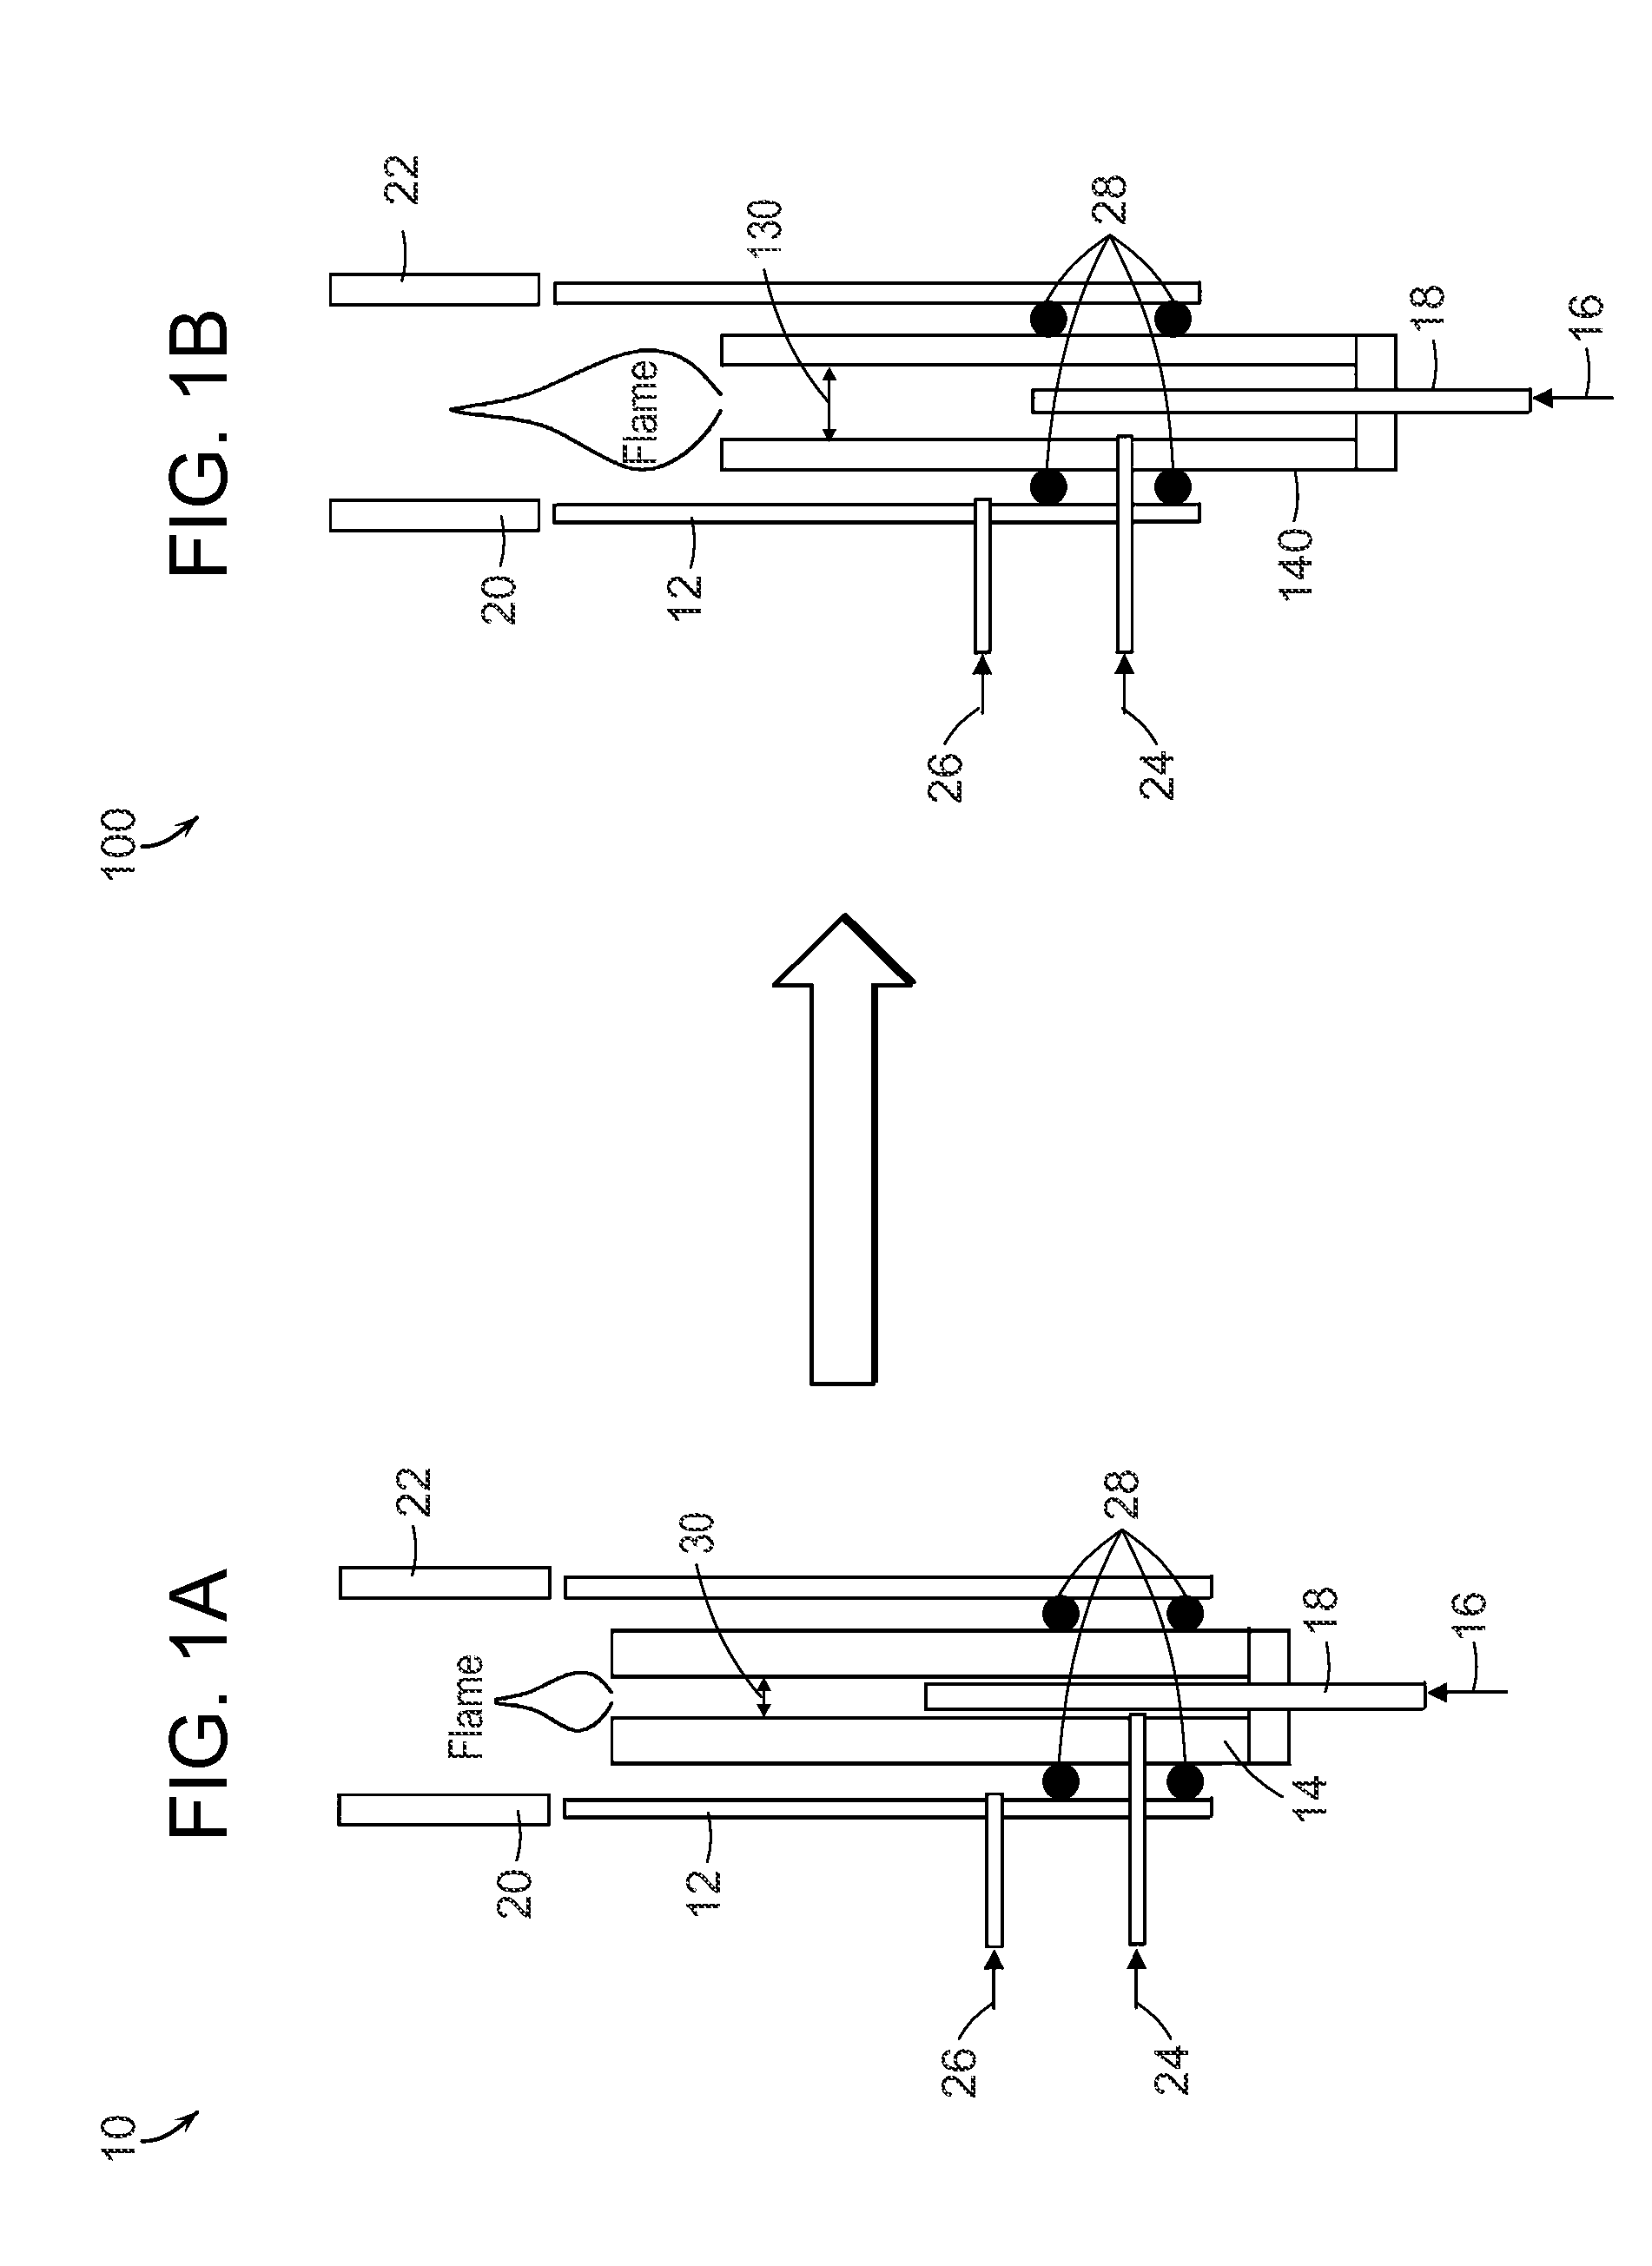 Flame ionization detection for supercritical fluid chromatography employing a matched separation column and flame burner